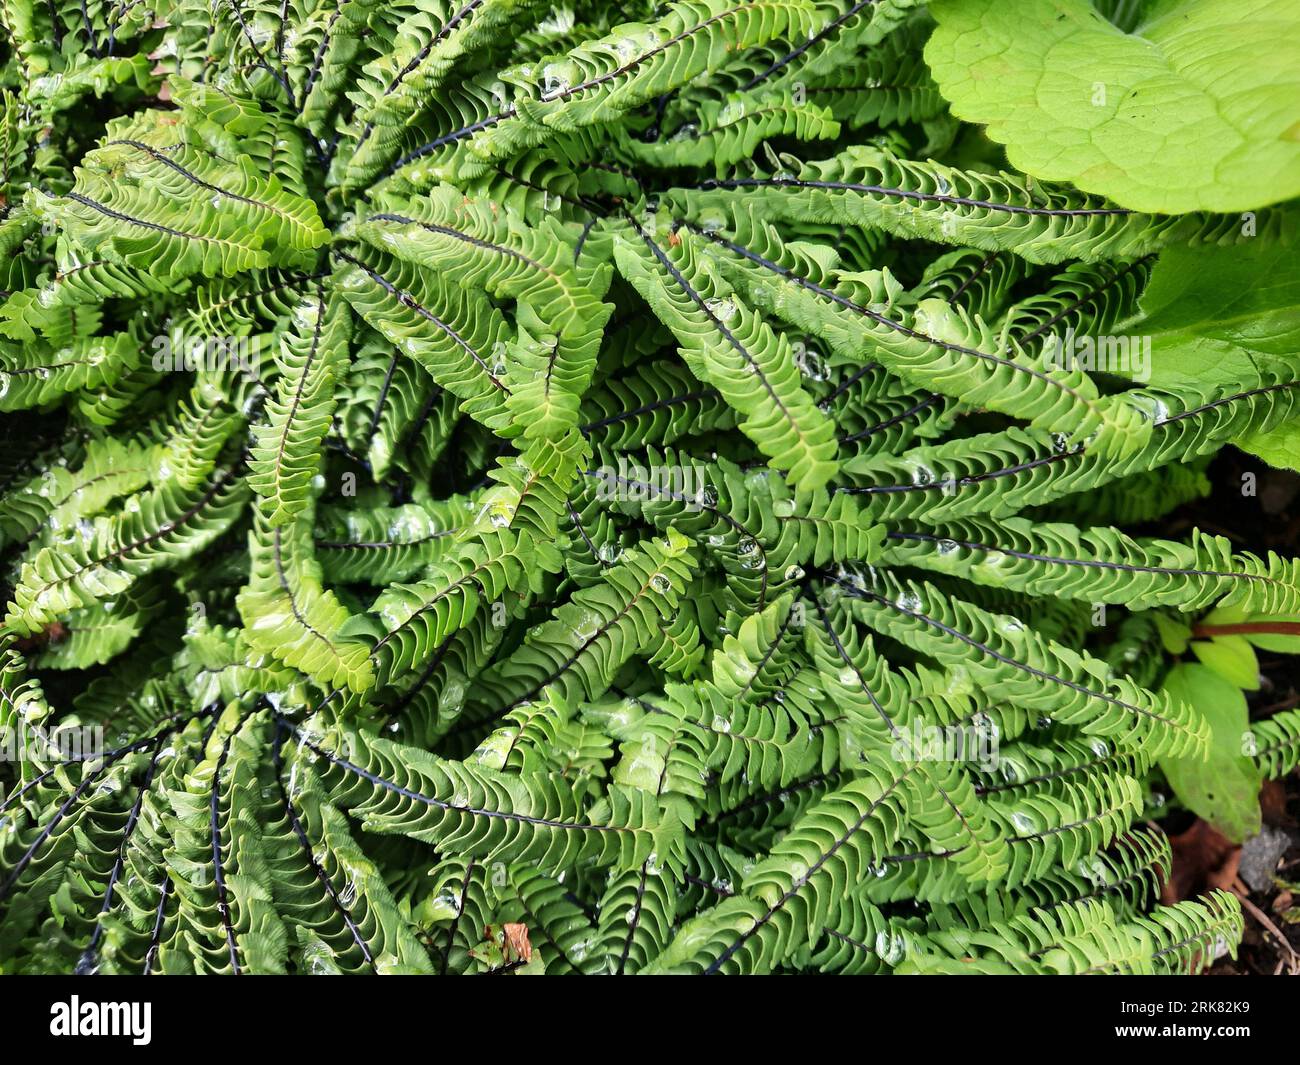 A vibrant green Adiantum stopiform with a large, lush array of delicate foliage on display Stock Photo